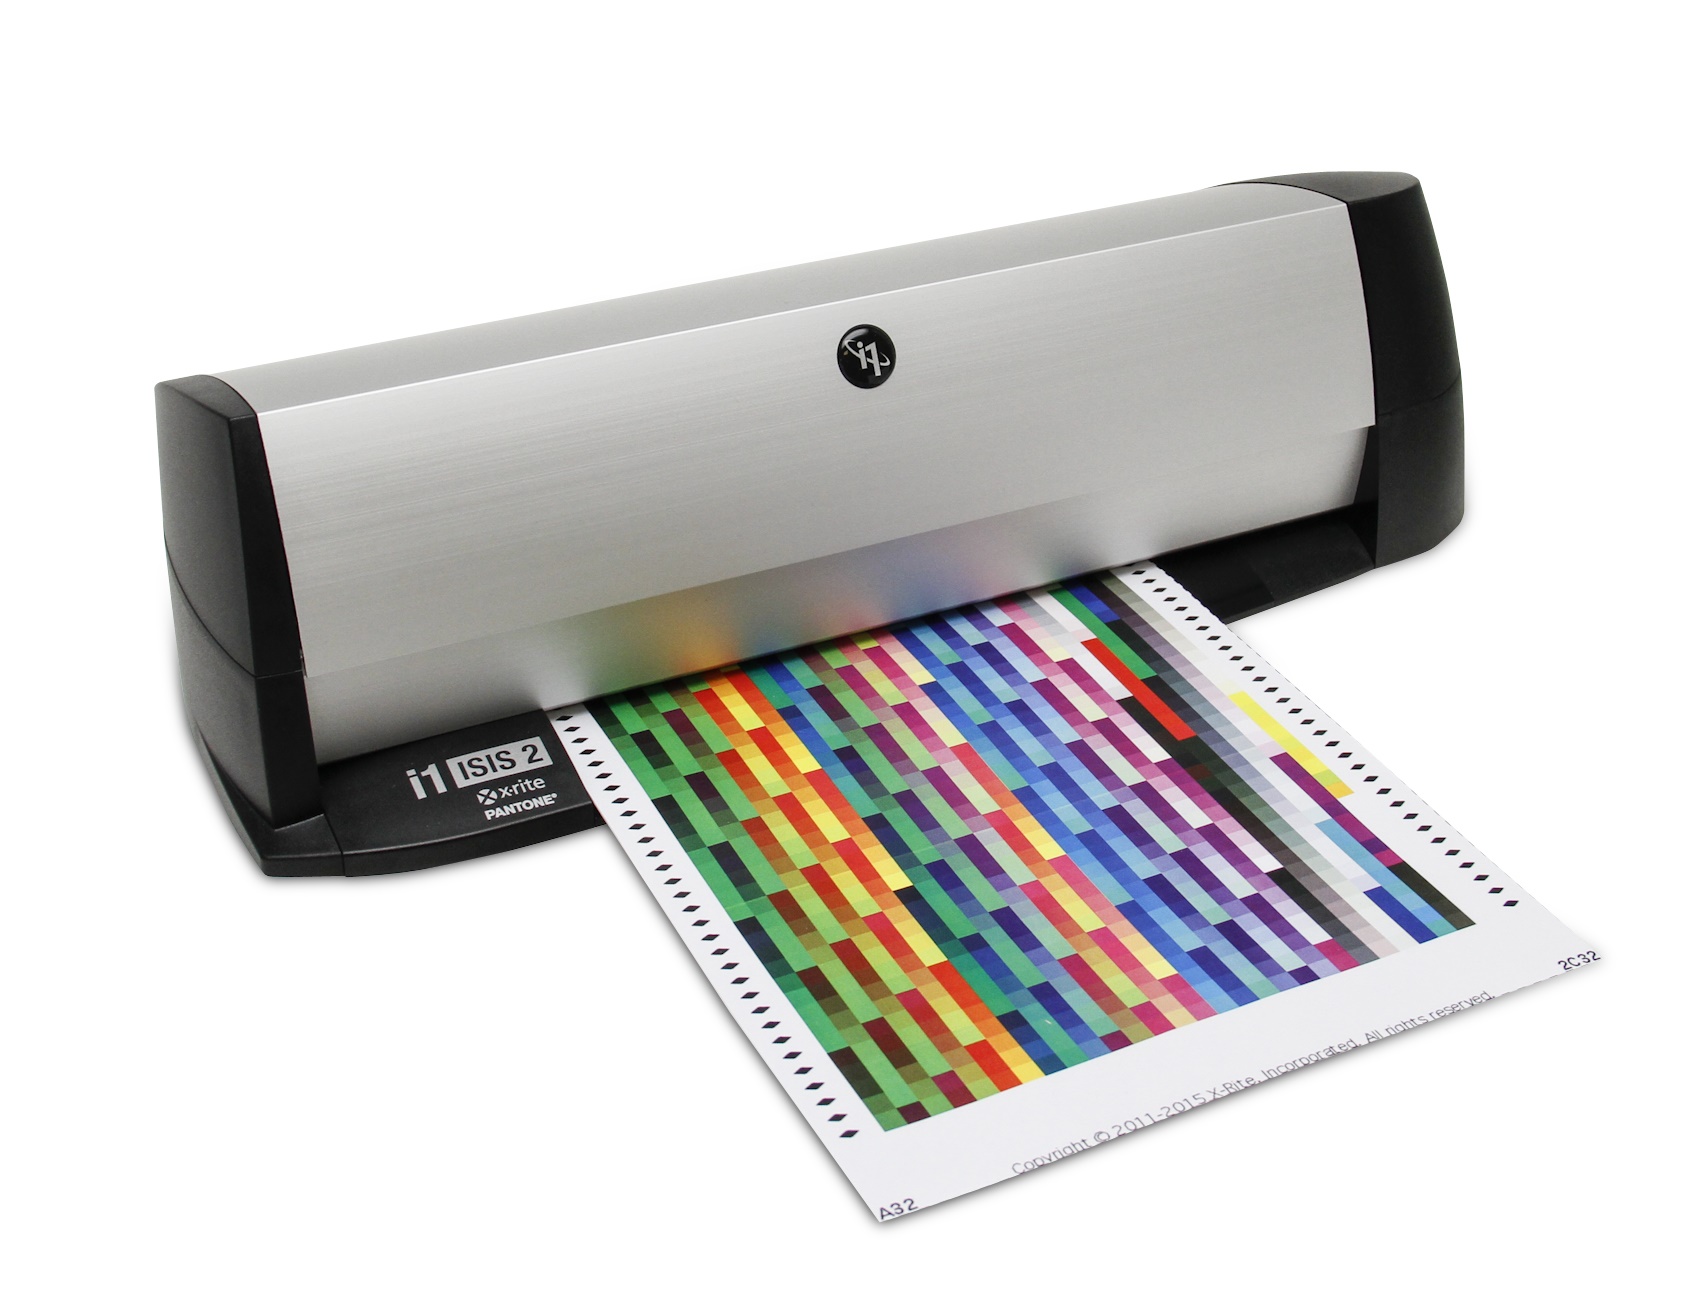 i1iSis 2 is ideal for prepress/premedia, photo and pressroom color management and profiling.